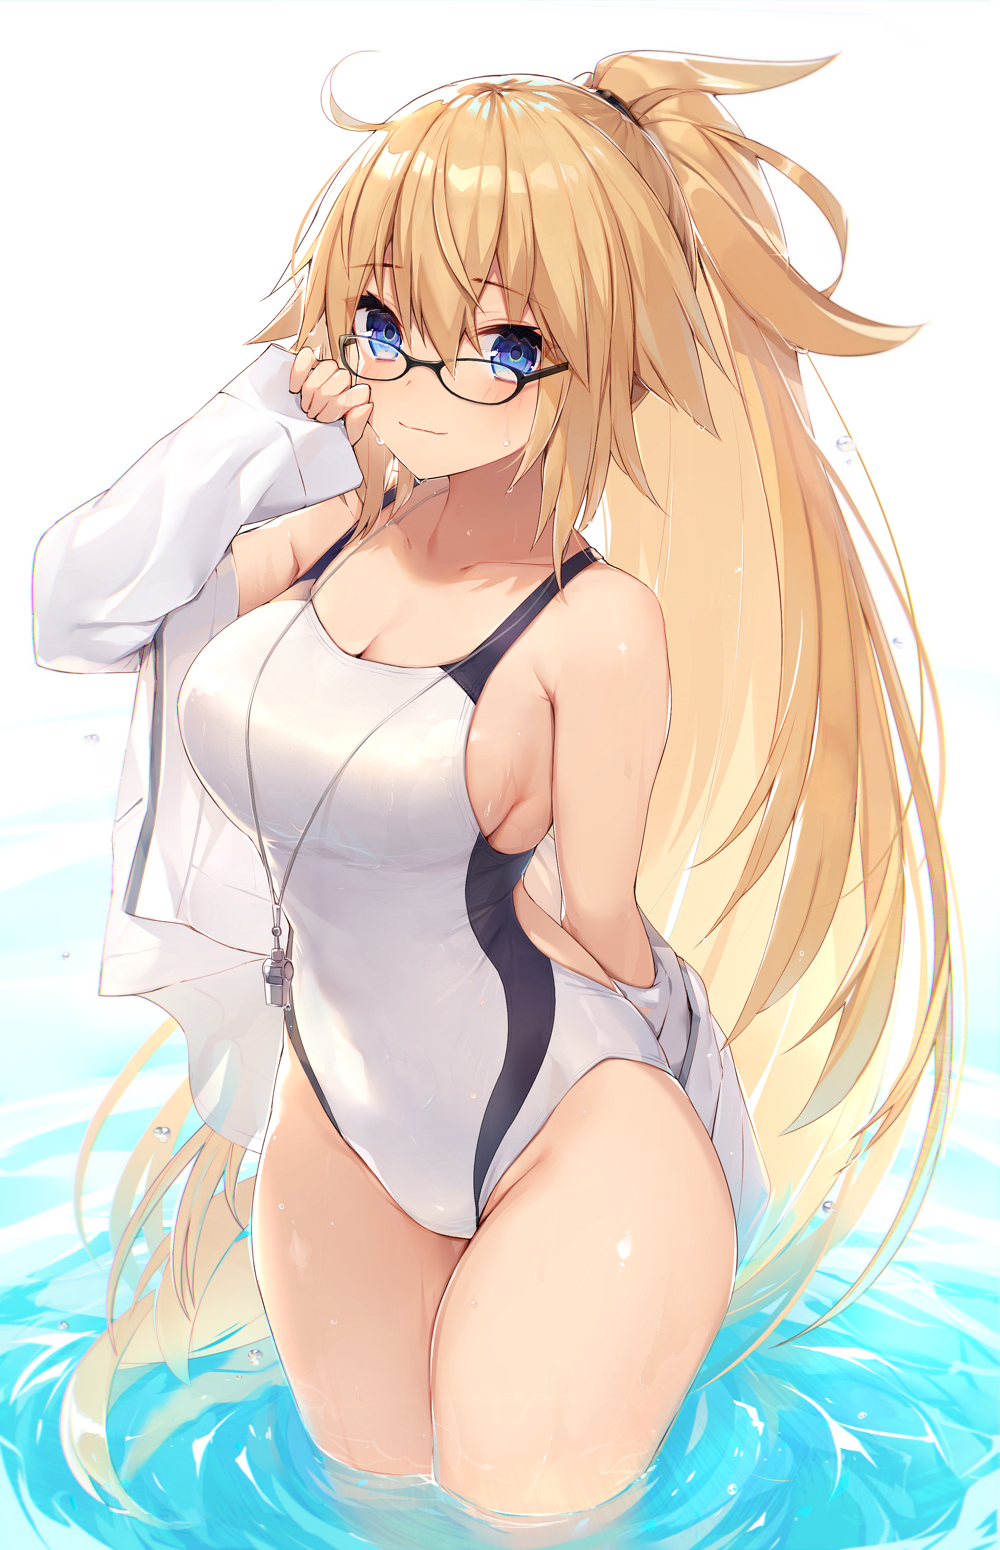 Anime 1000x1550 anime anime girls digital art artwork portrait display simple background bare shoulders glasses blonde ponytail blue eyes water Fate/Grand Order swimwear Jeanne (Alter) (Fate/Grand Order) Jeanne d'Arc (Fate) big boobs one-piece swimsuit smiling open shirt Fate series Muryotaro